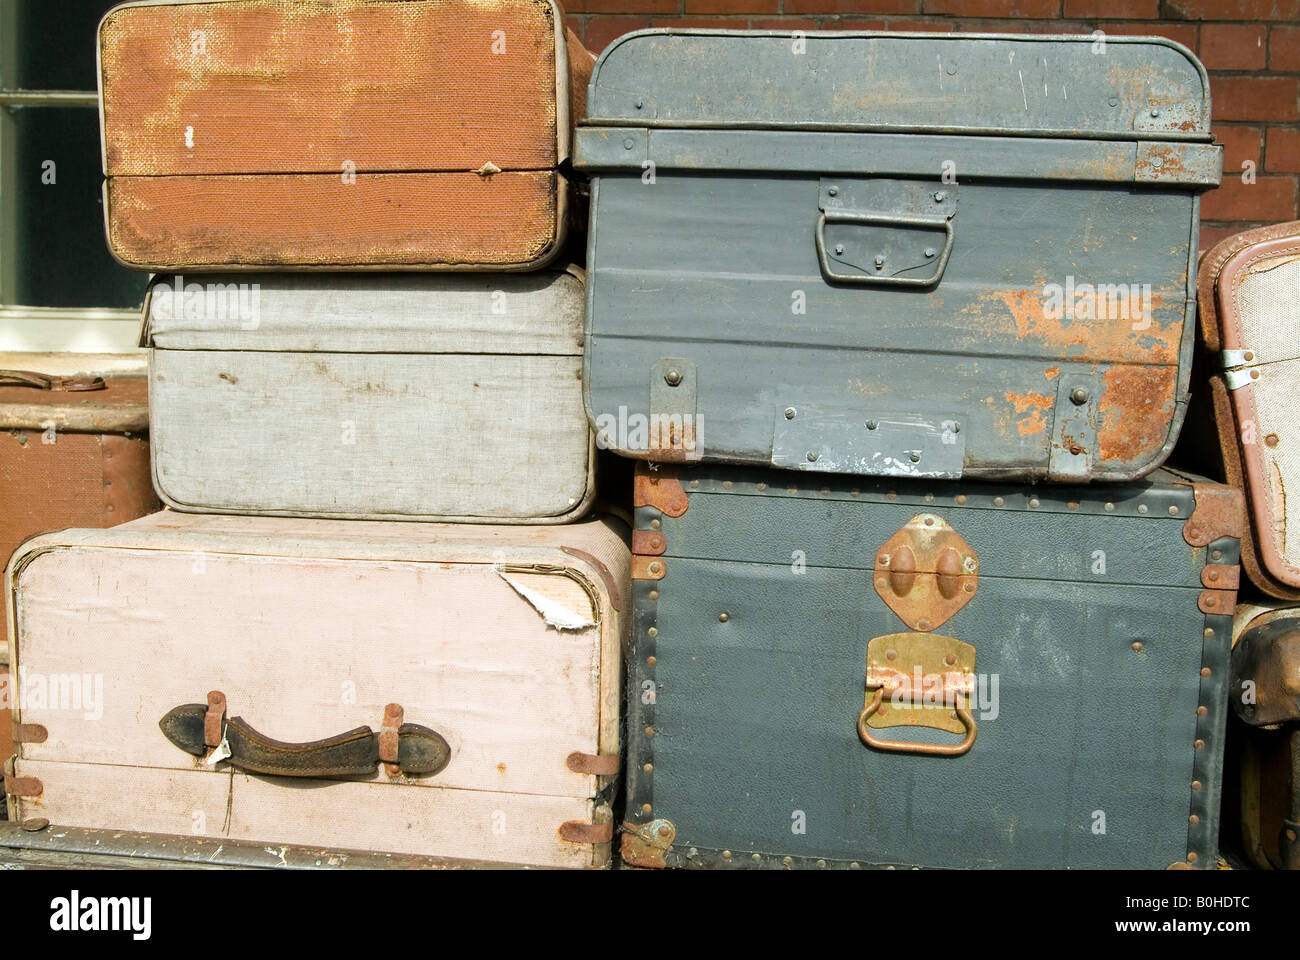 Worn old suitcases stacked on a railway platform Stock Photo